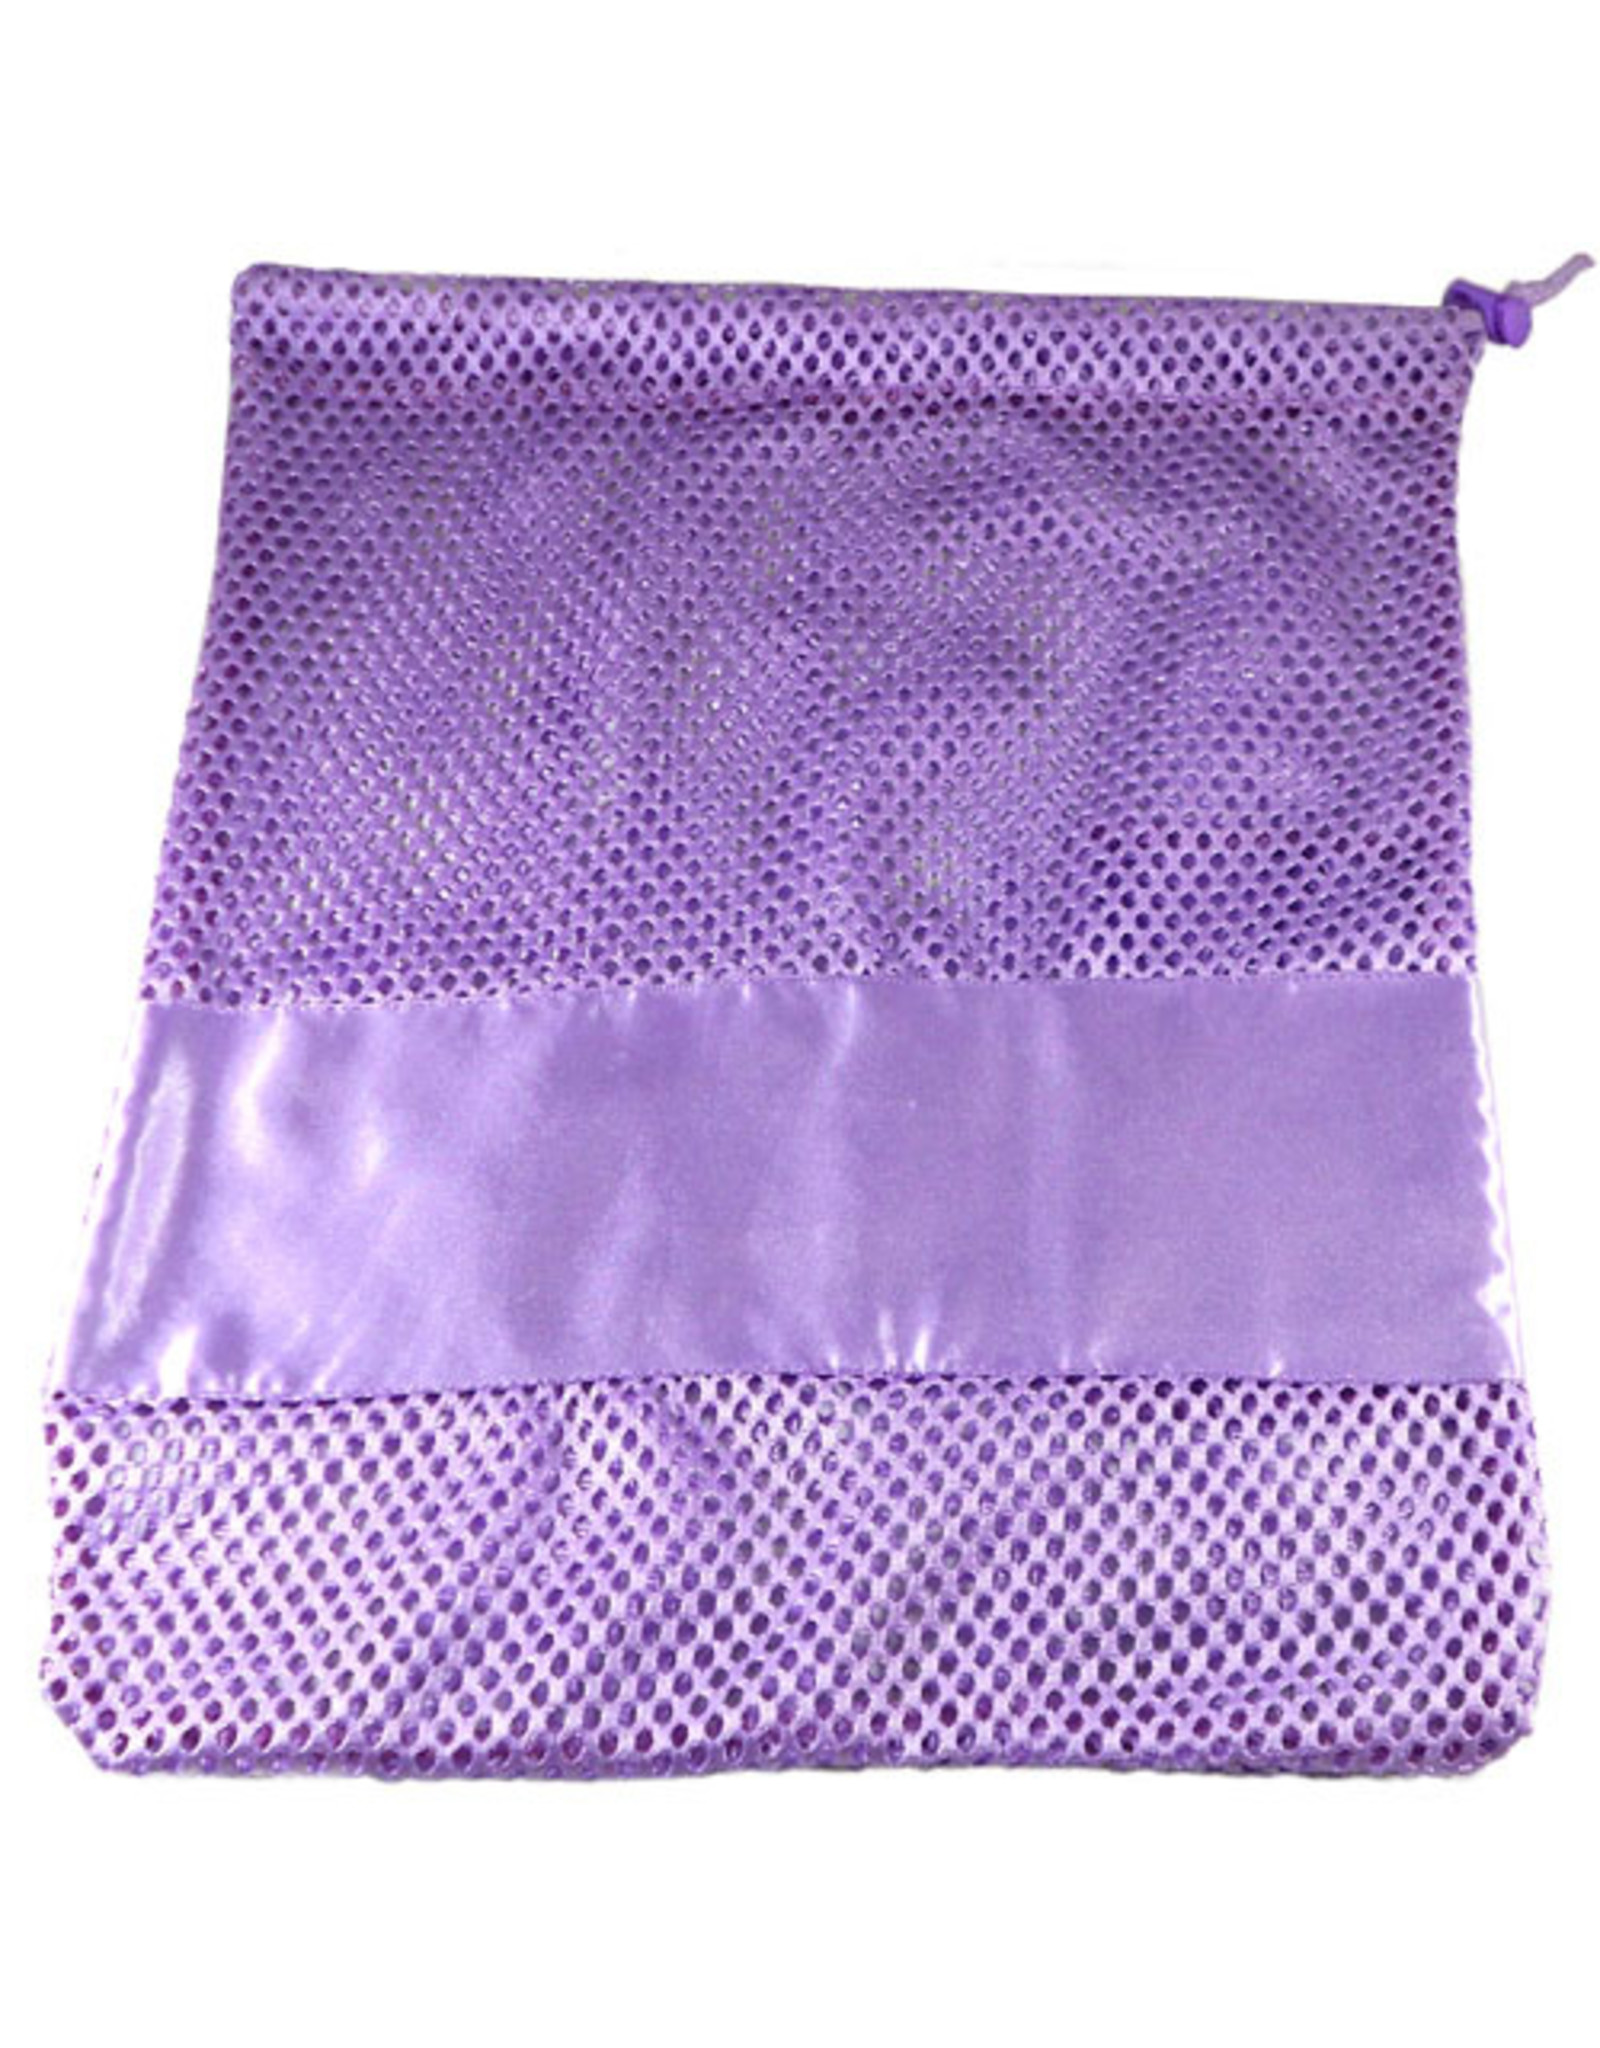 Pillows for Pointes Pillows Mesh Bags (SPSP)